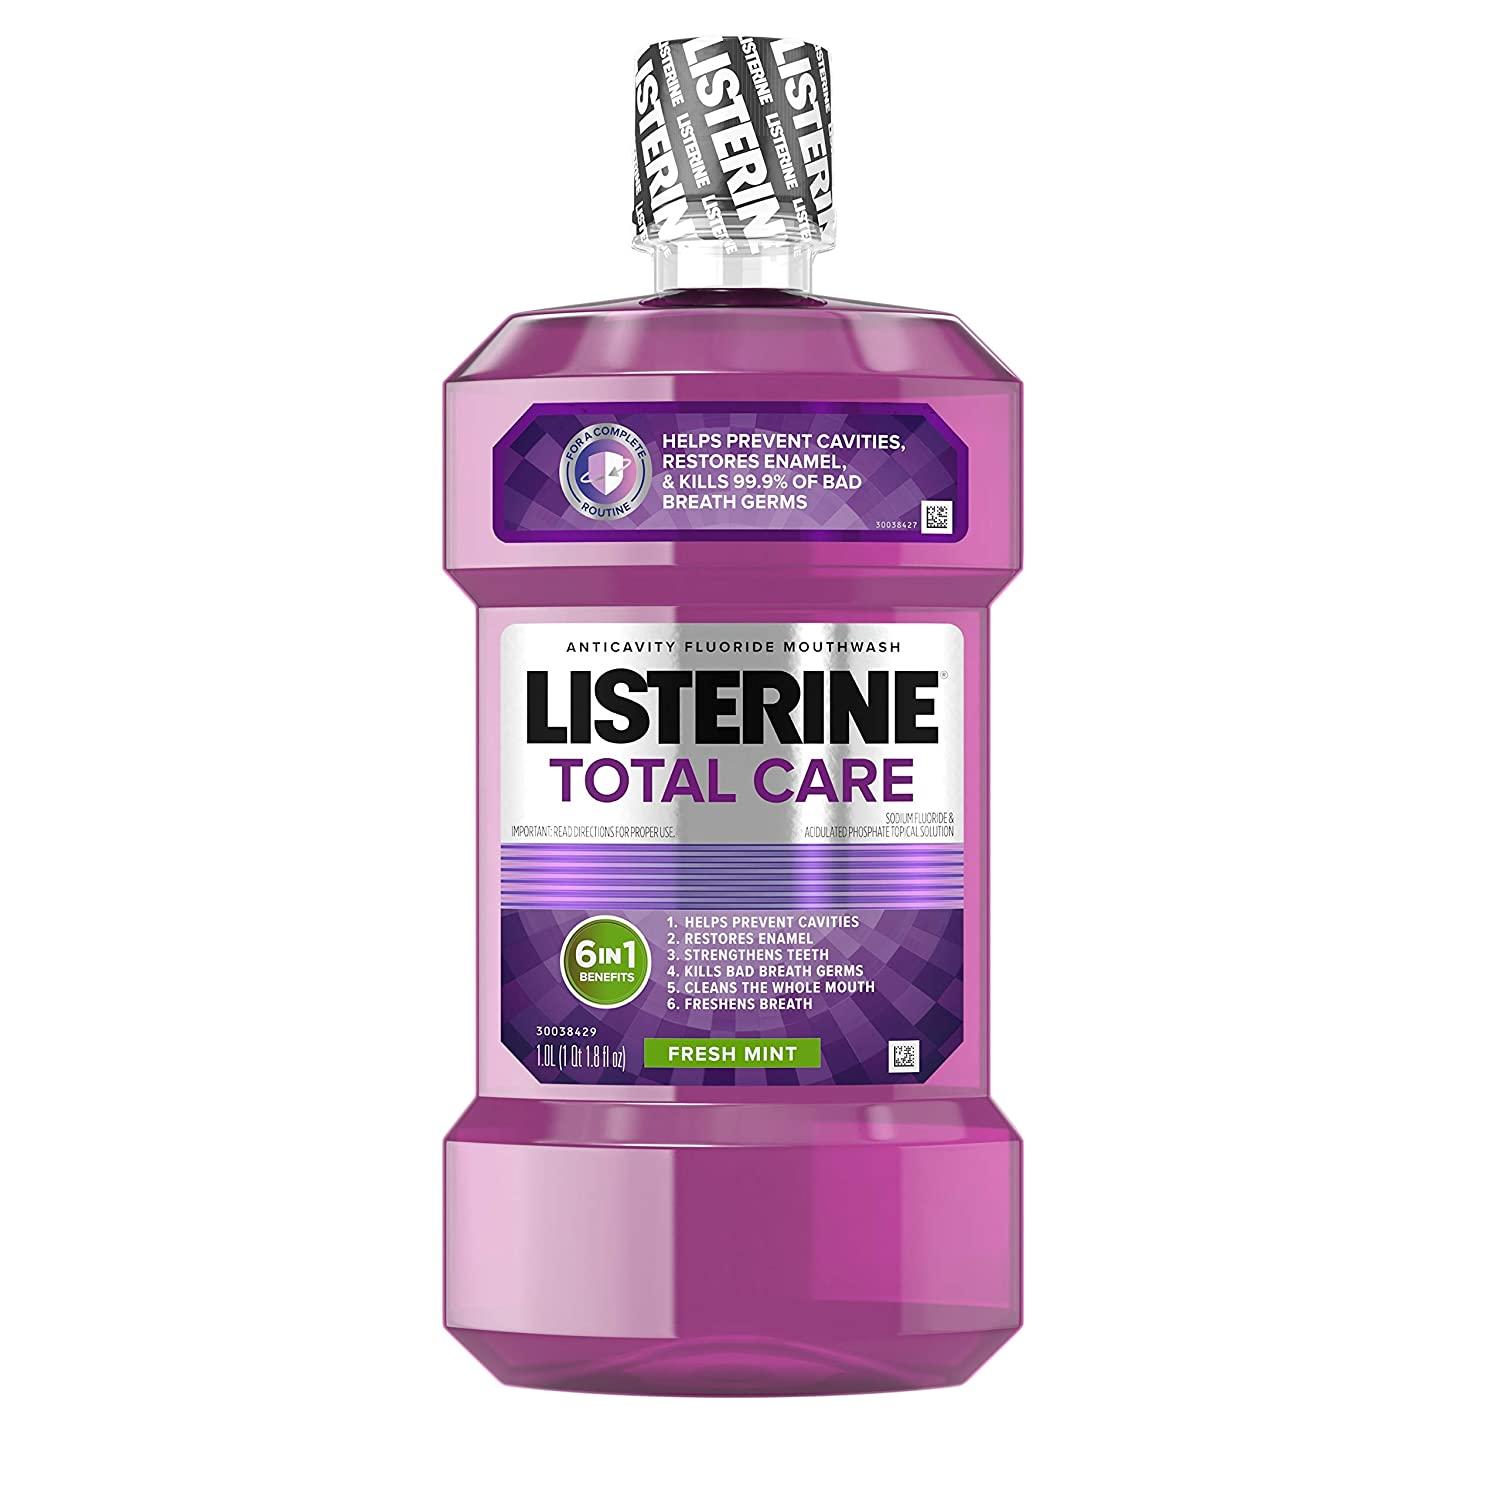 Listerine Total Care Fresh Mint Anticavity Fluoride Mouthwash for $4.59 Shipped